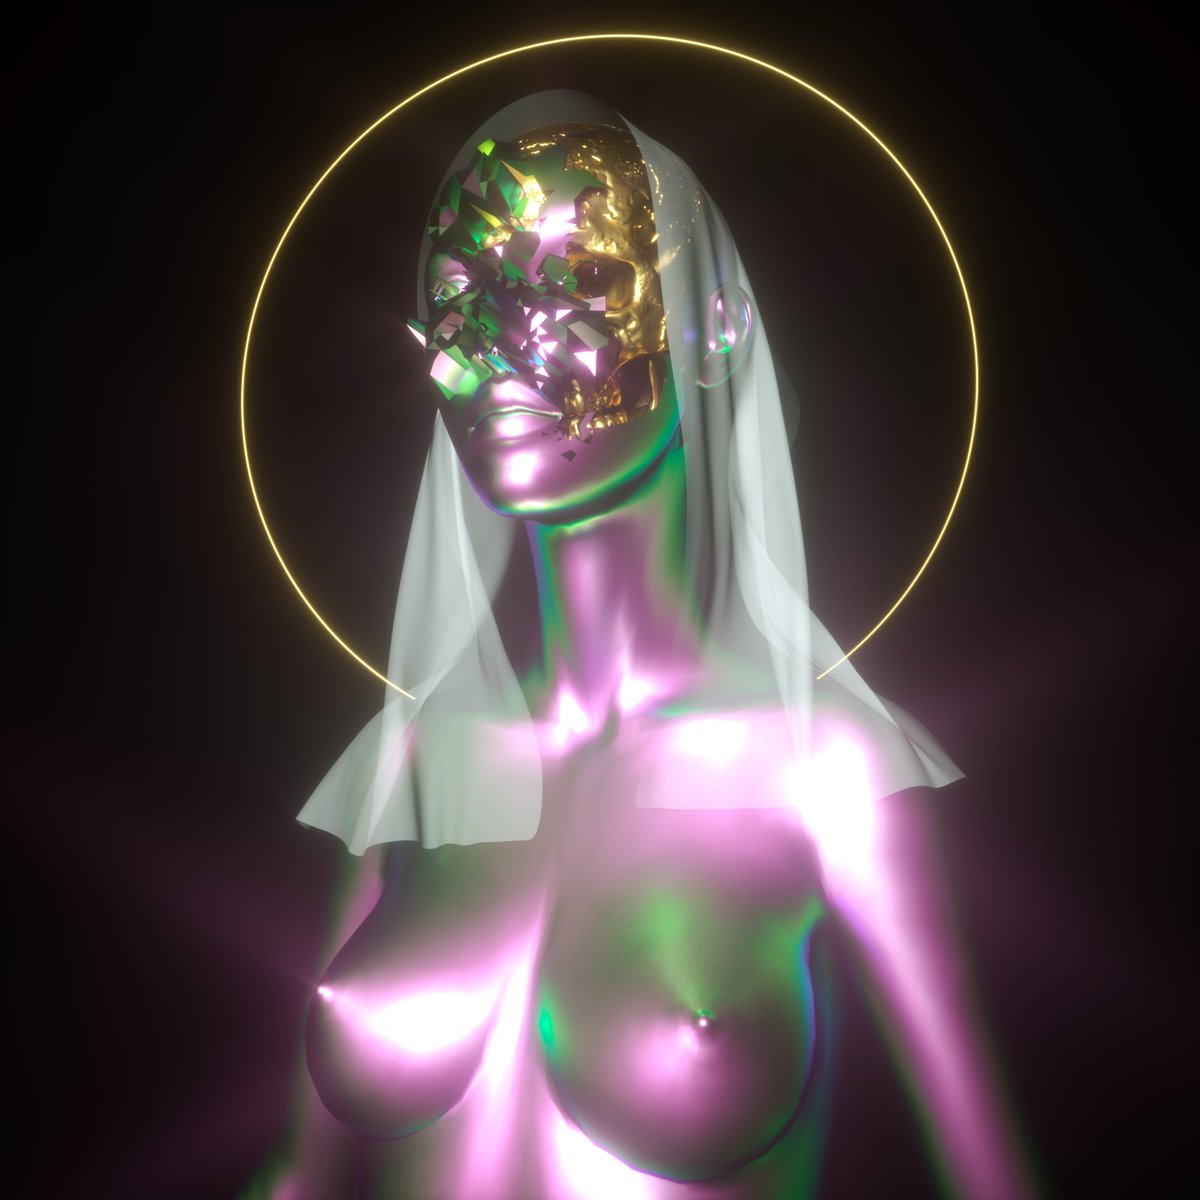 Madonna is available in @rariblecom  as NFT collect it from the link in bio

#nft #nftart #cryptoart #c4d #3dart #artwork #empireoffuture #maxon #octanerender